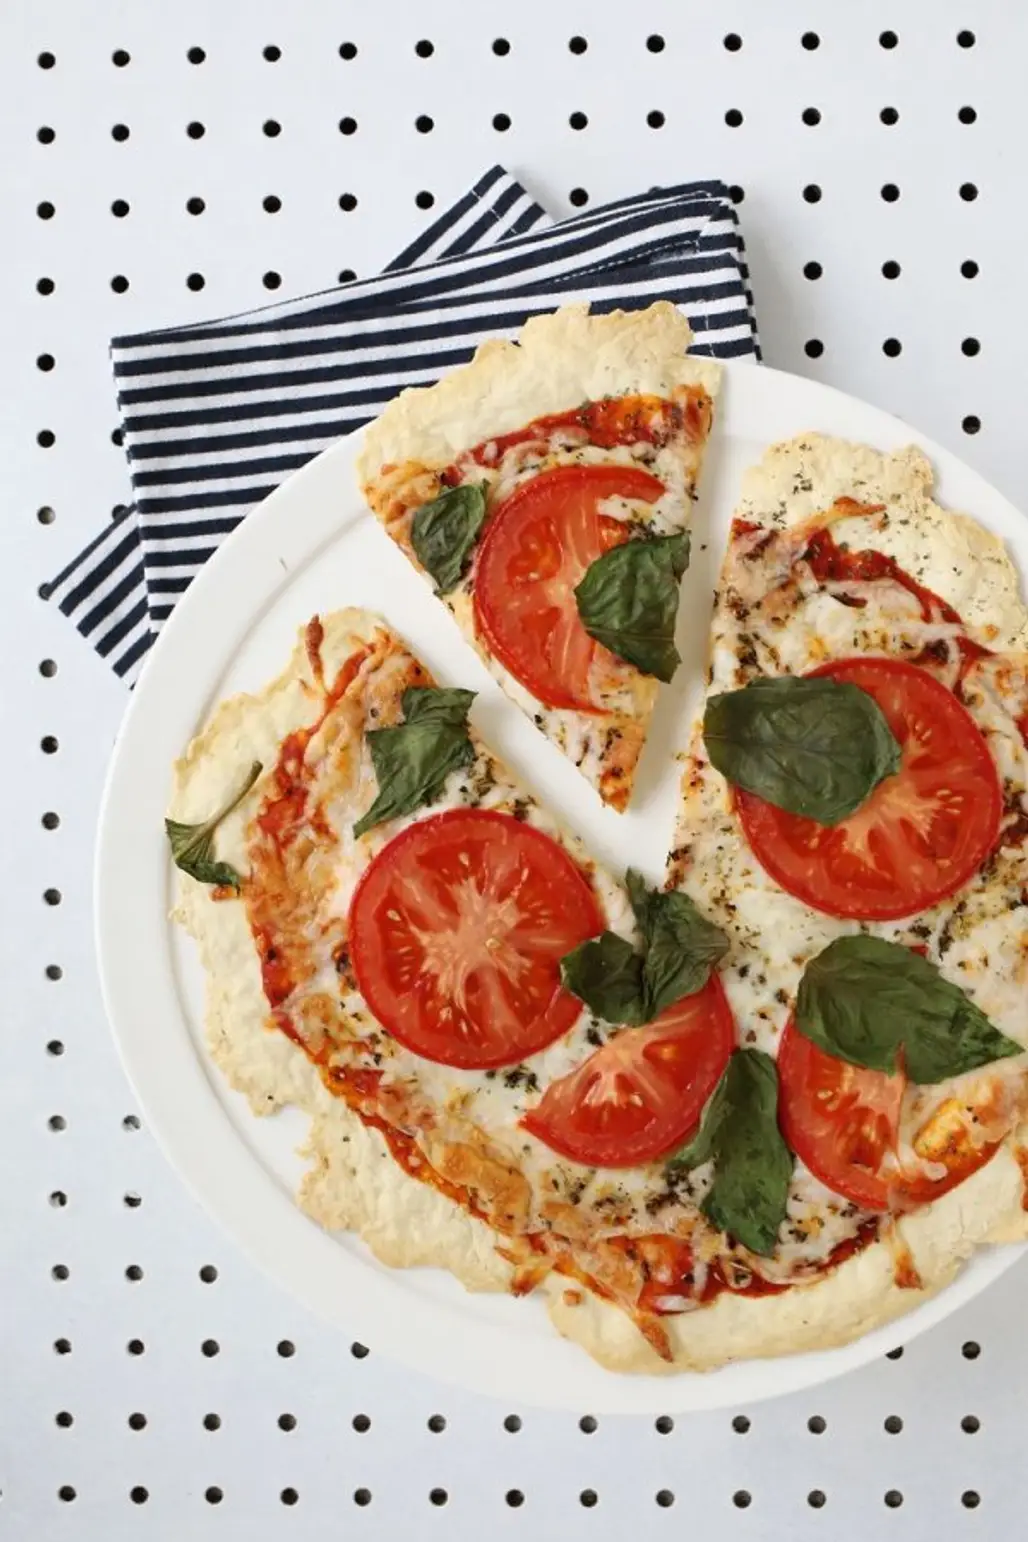 Choose a Slice of Thin Crust Pizza over Thick Crust Pizza